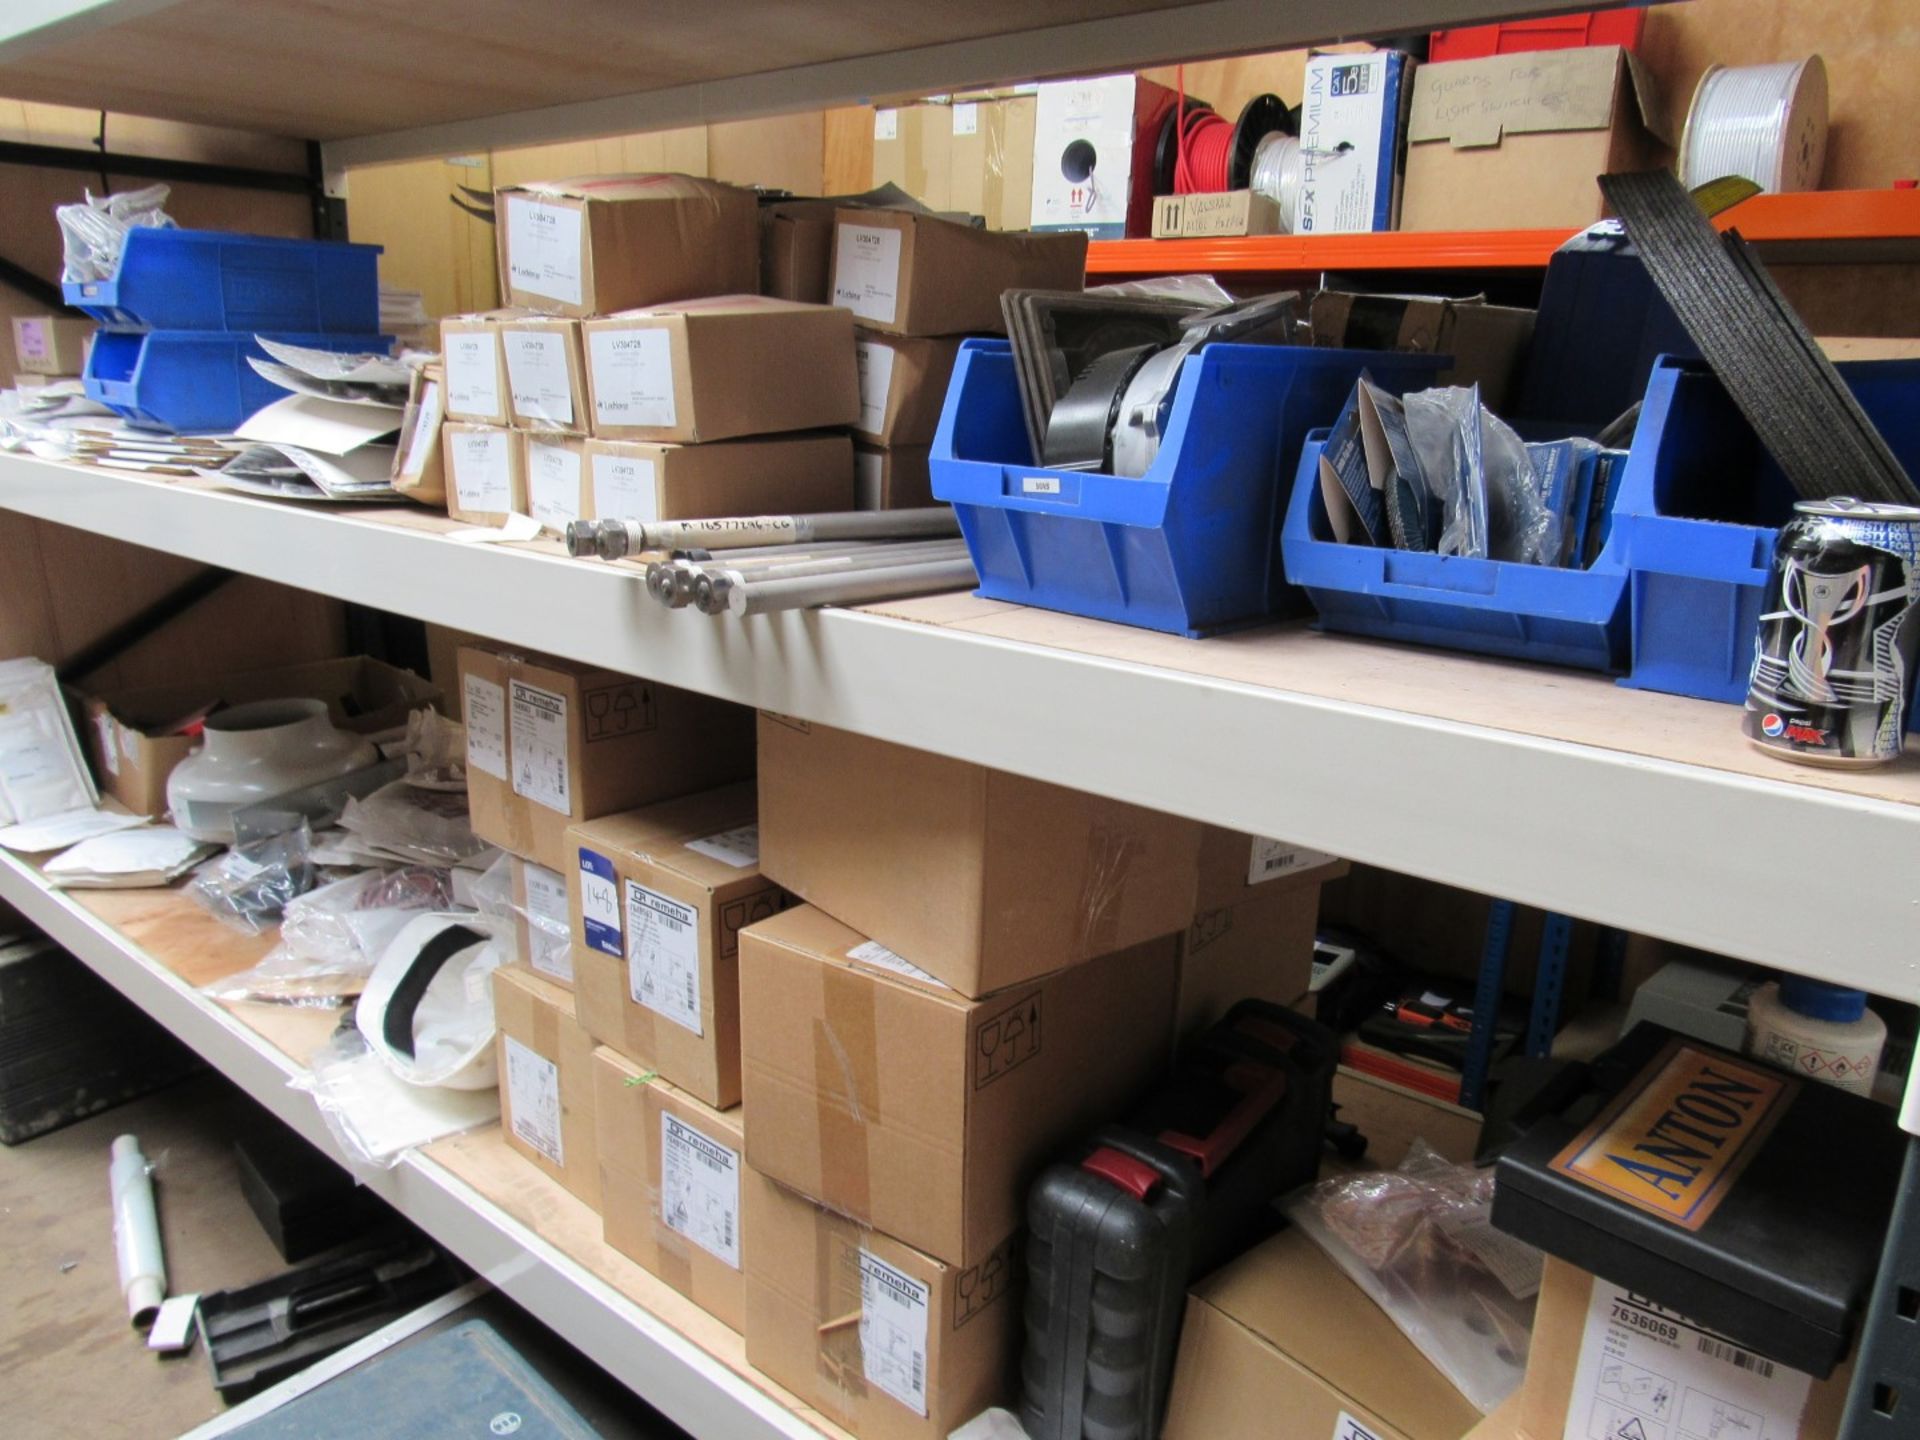 Quantity gaskets and parts to 2 shelves